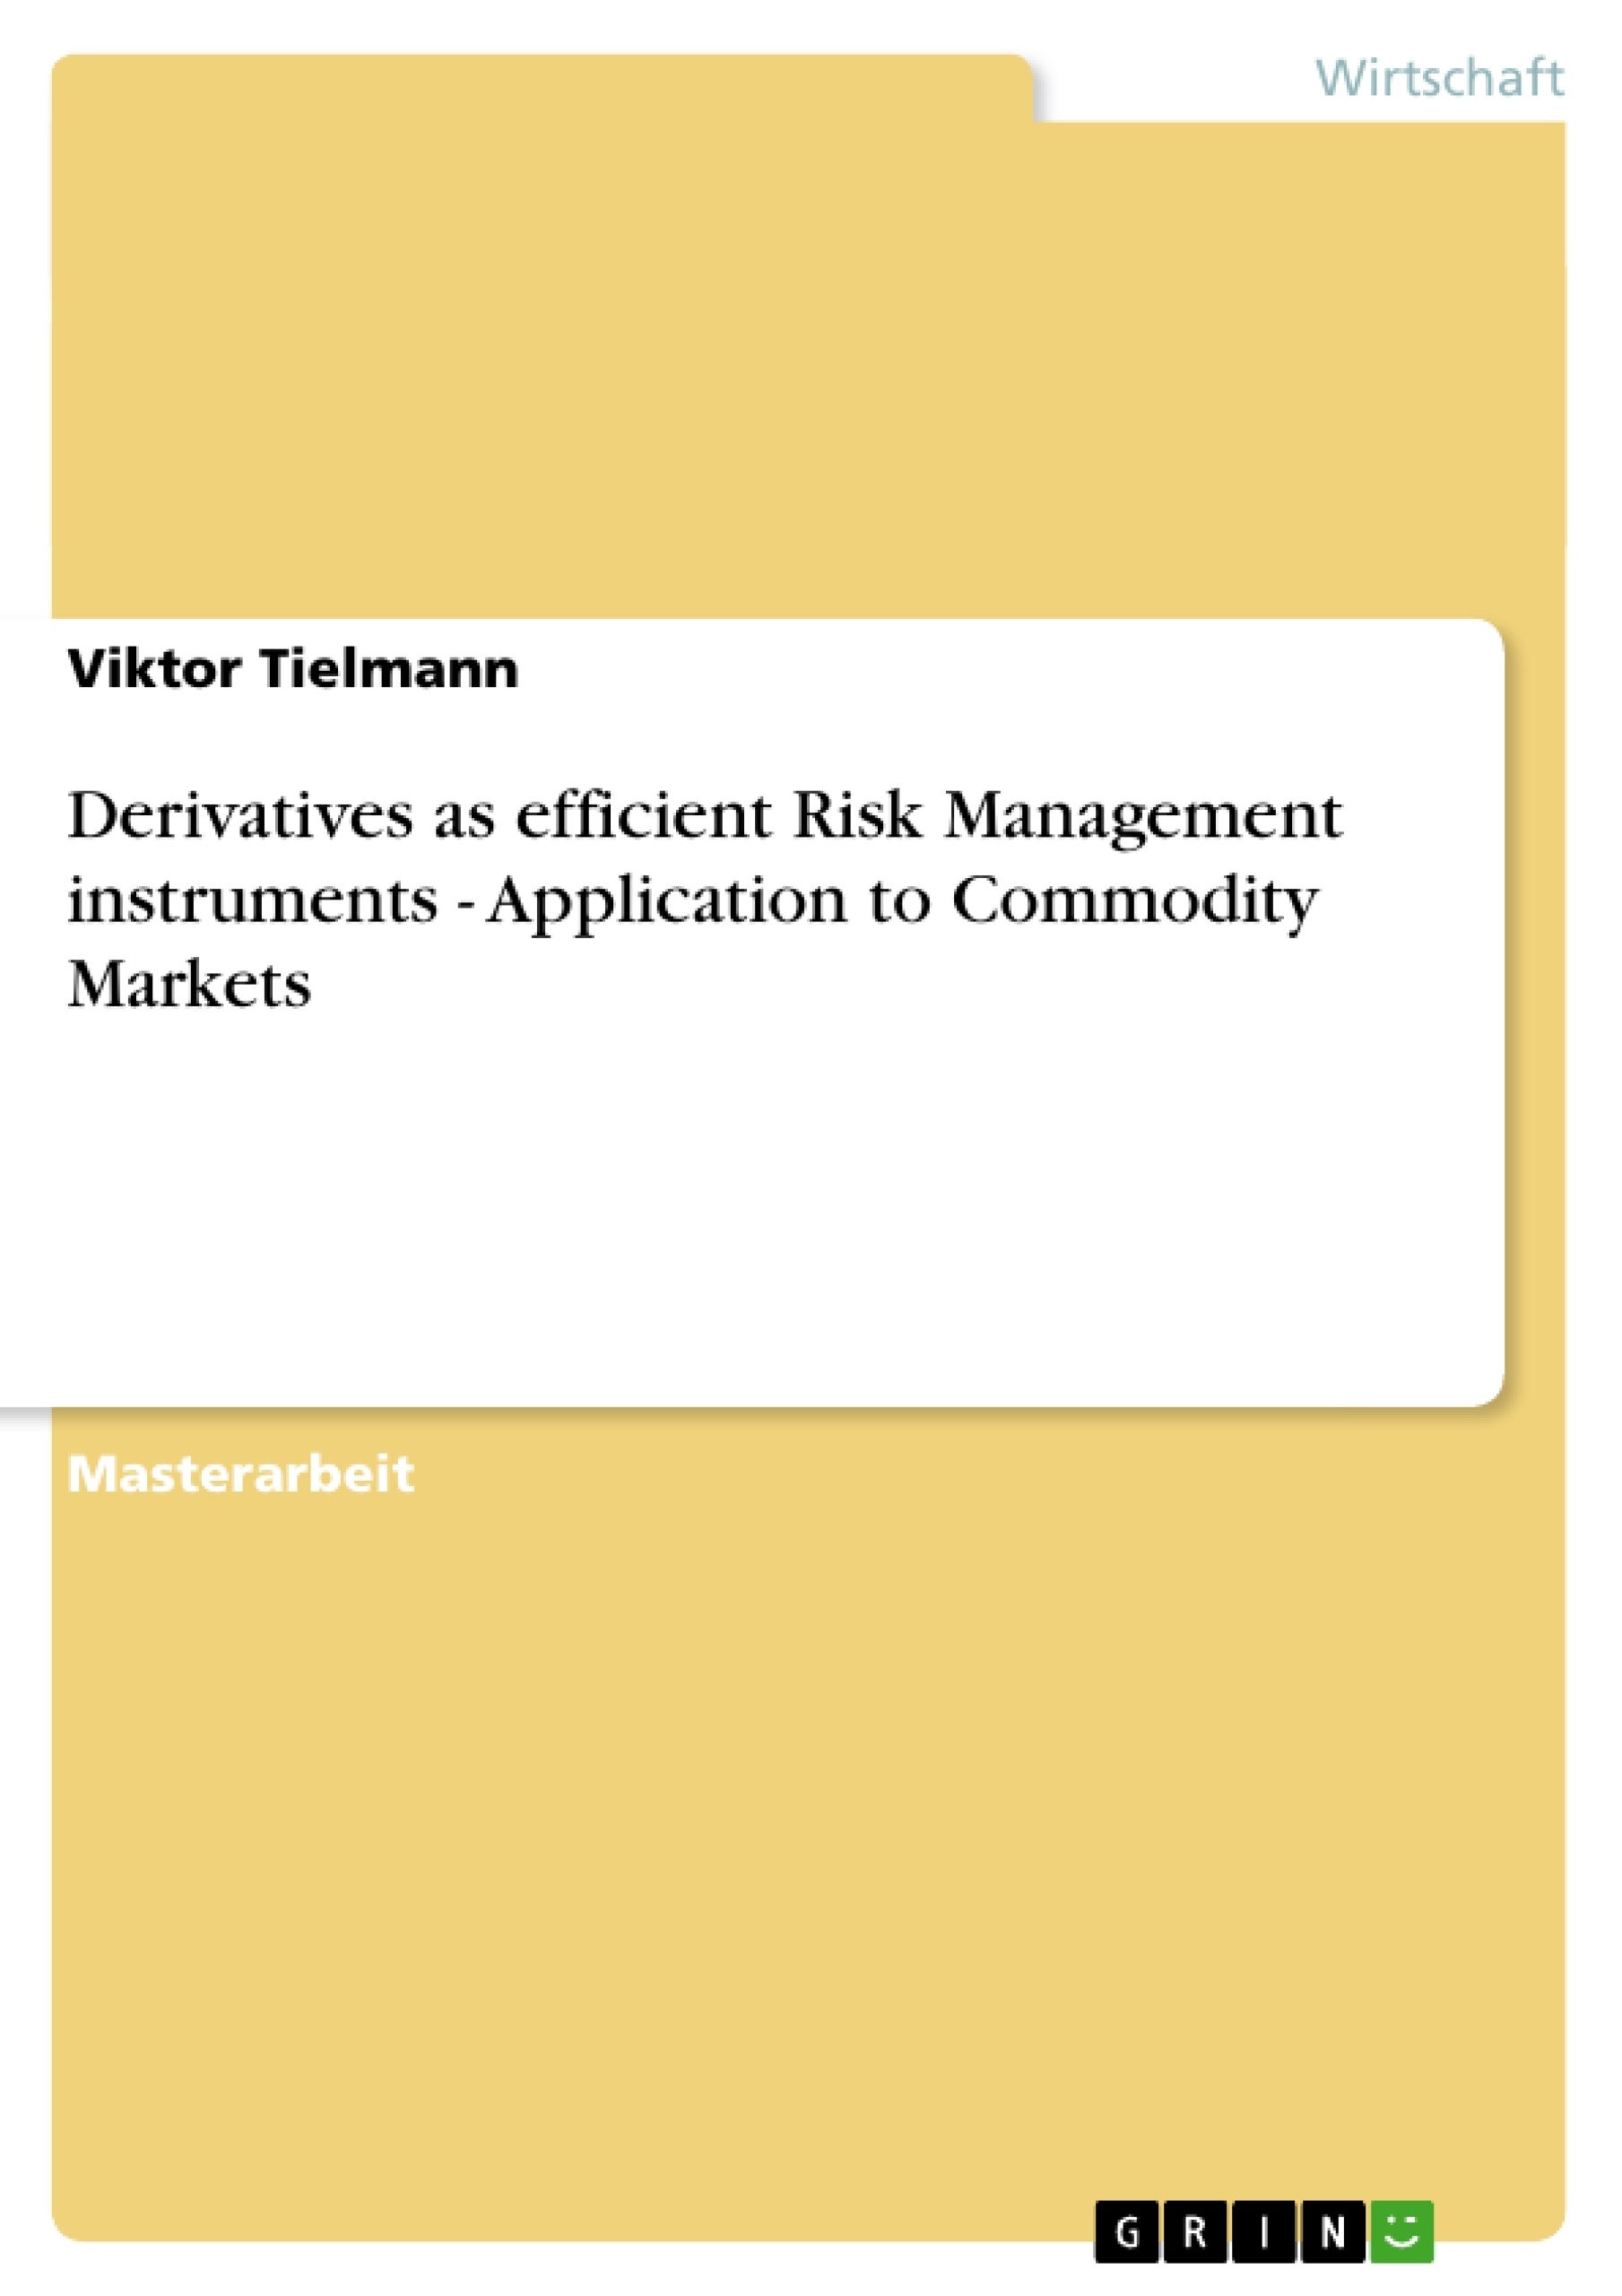 Titel: Derivatives as efficient Risk Management instruments - Application to Commodity Markets